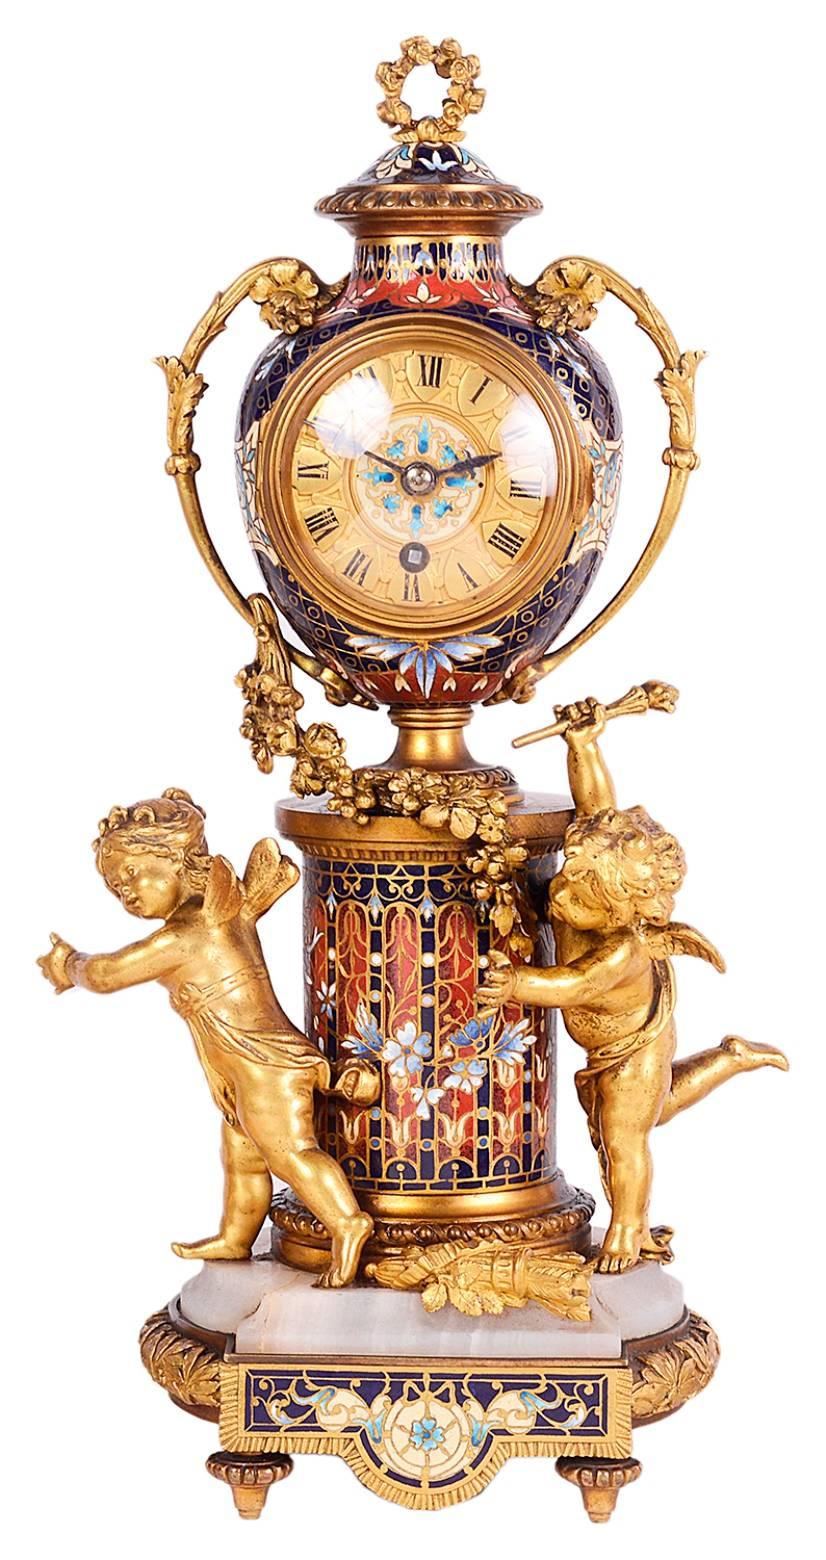 A fine quality late 19th century French gilded ormolu and Champlevé enamel clock garniture. Having cherubs playing games around the clock, which has a gilded face and Roman numerals, and a pair of matching enamel and ormolu candle sticks.